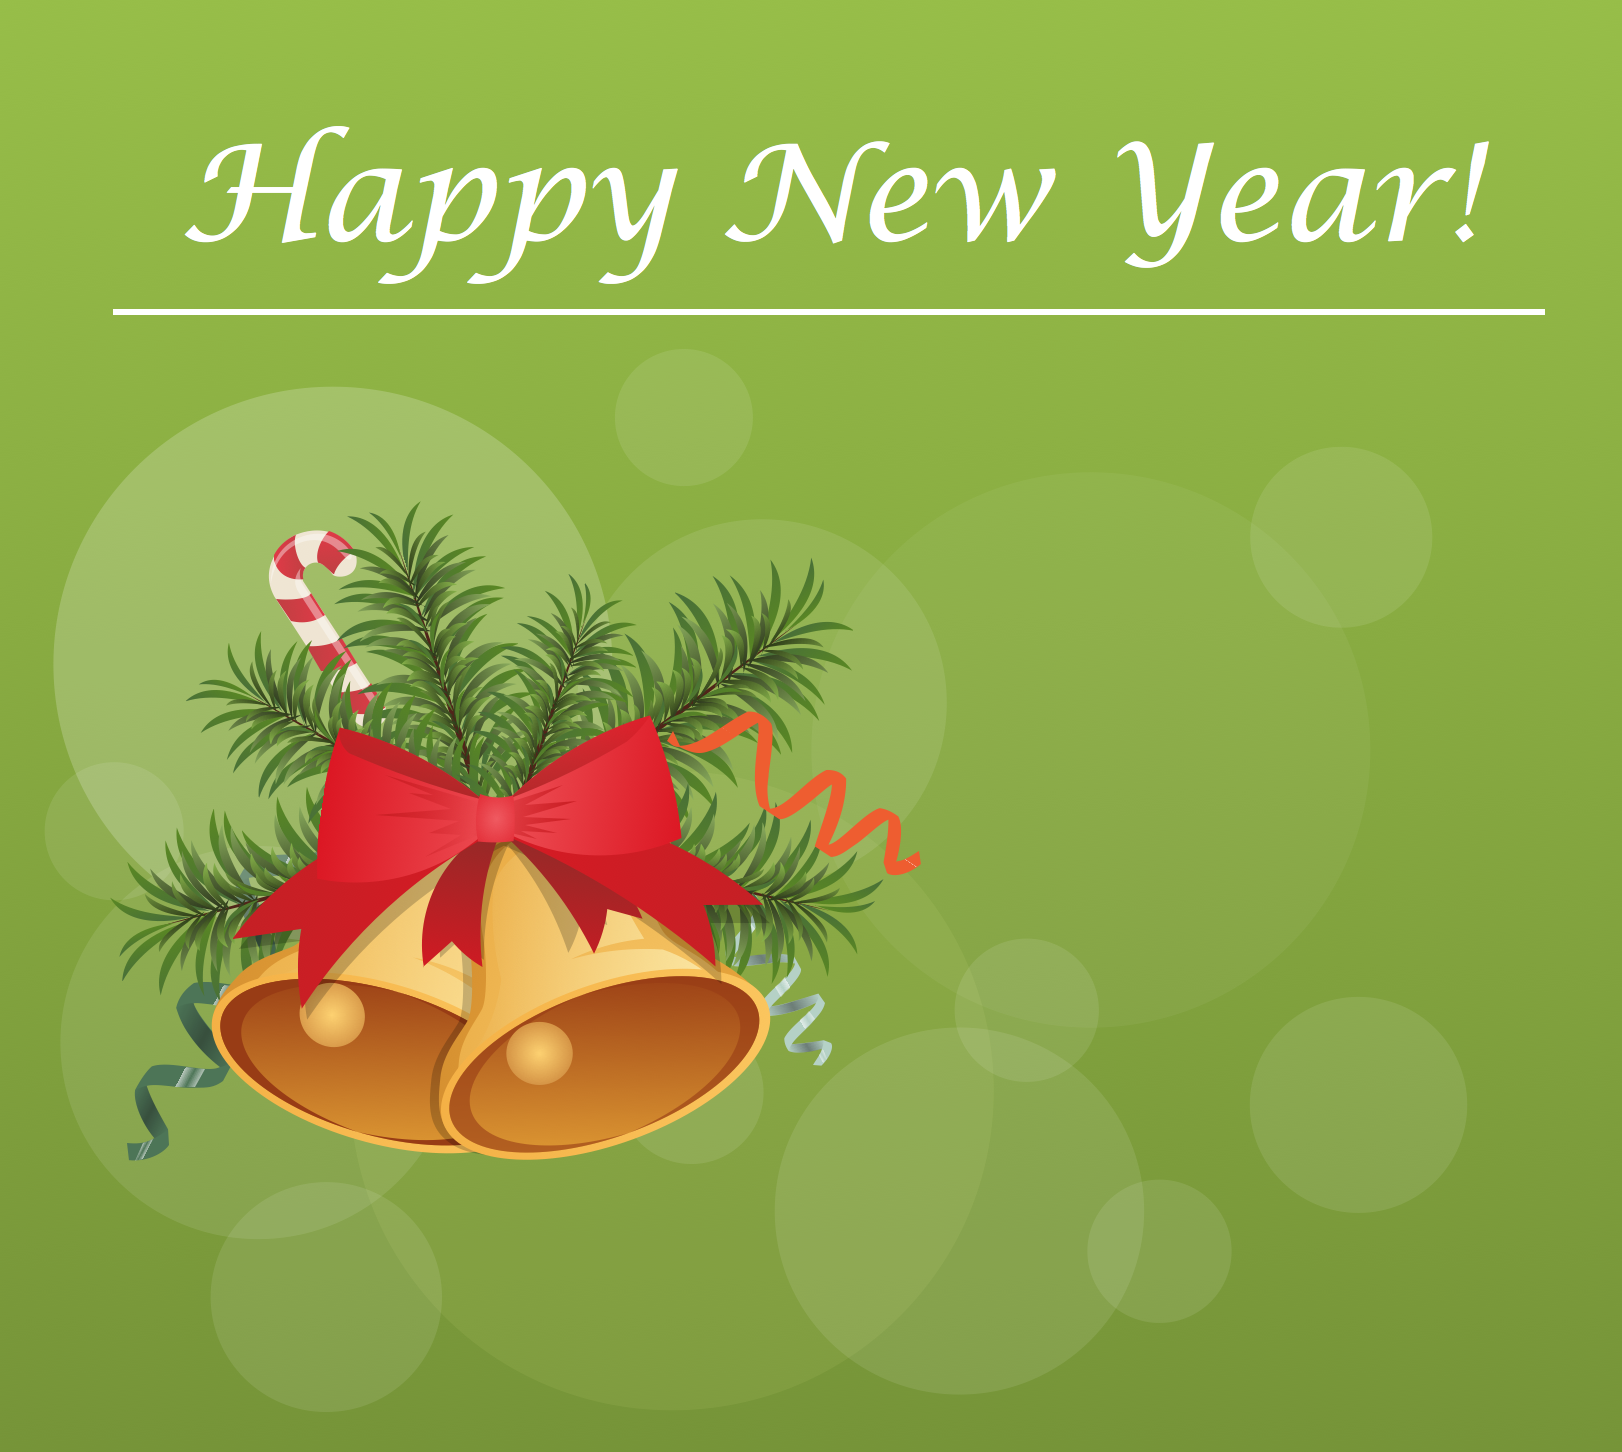 new year bells clipart - photo #8